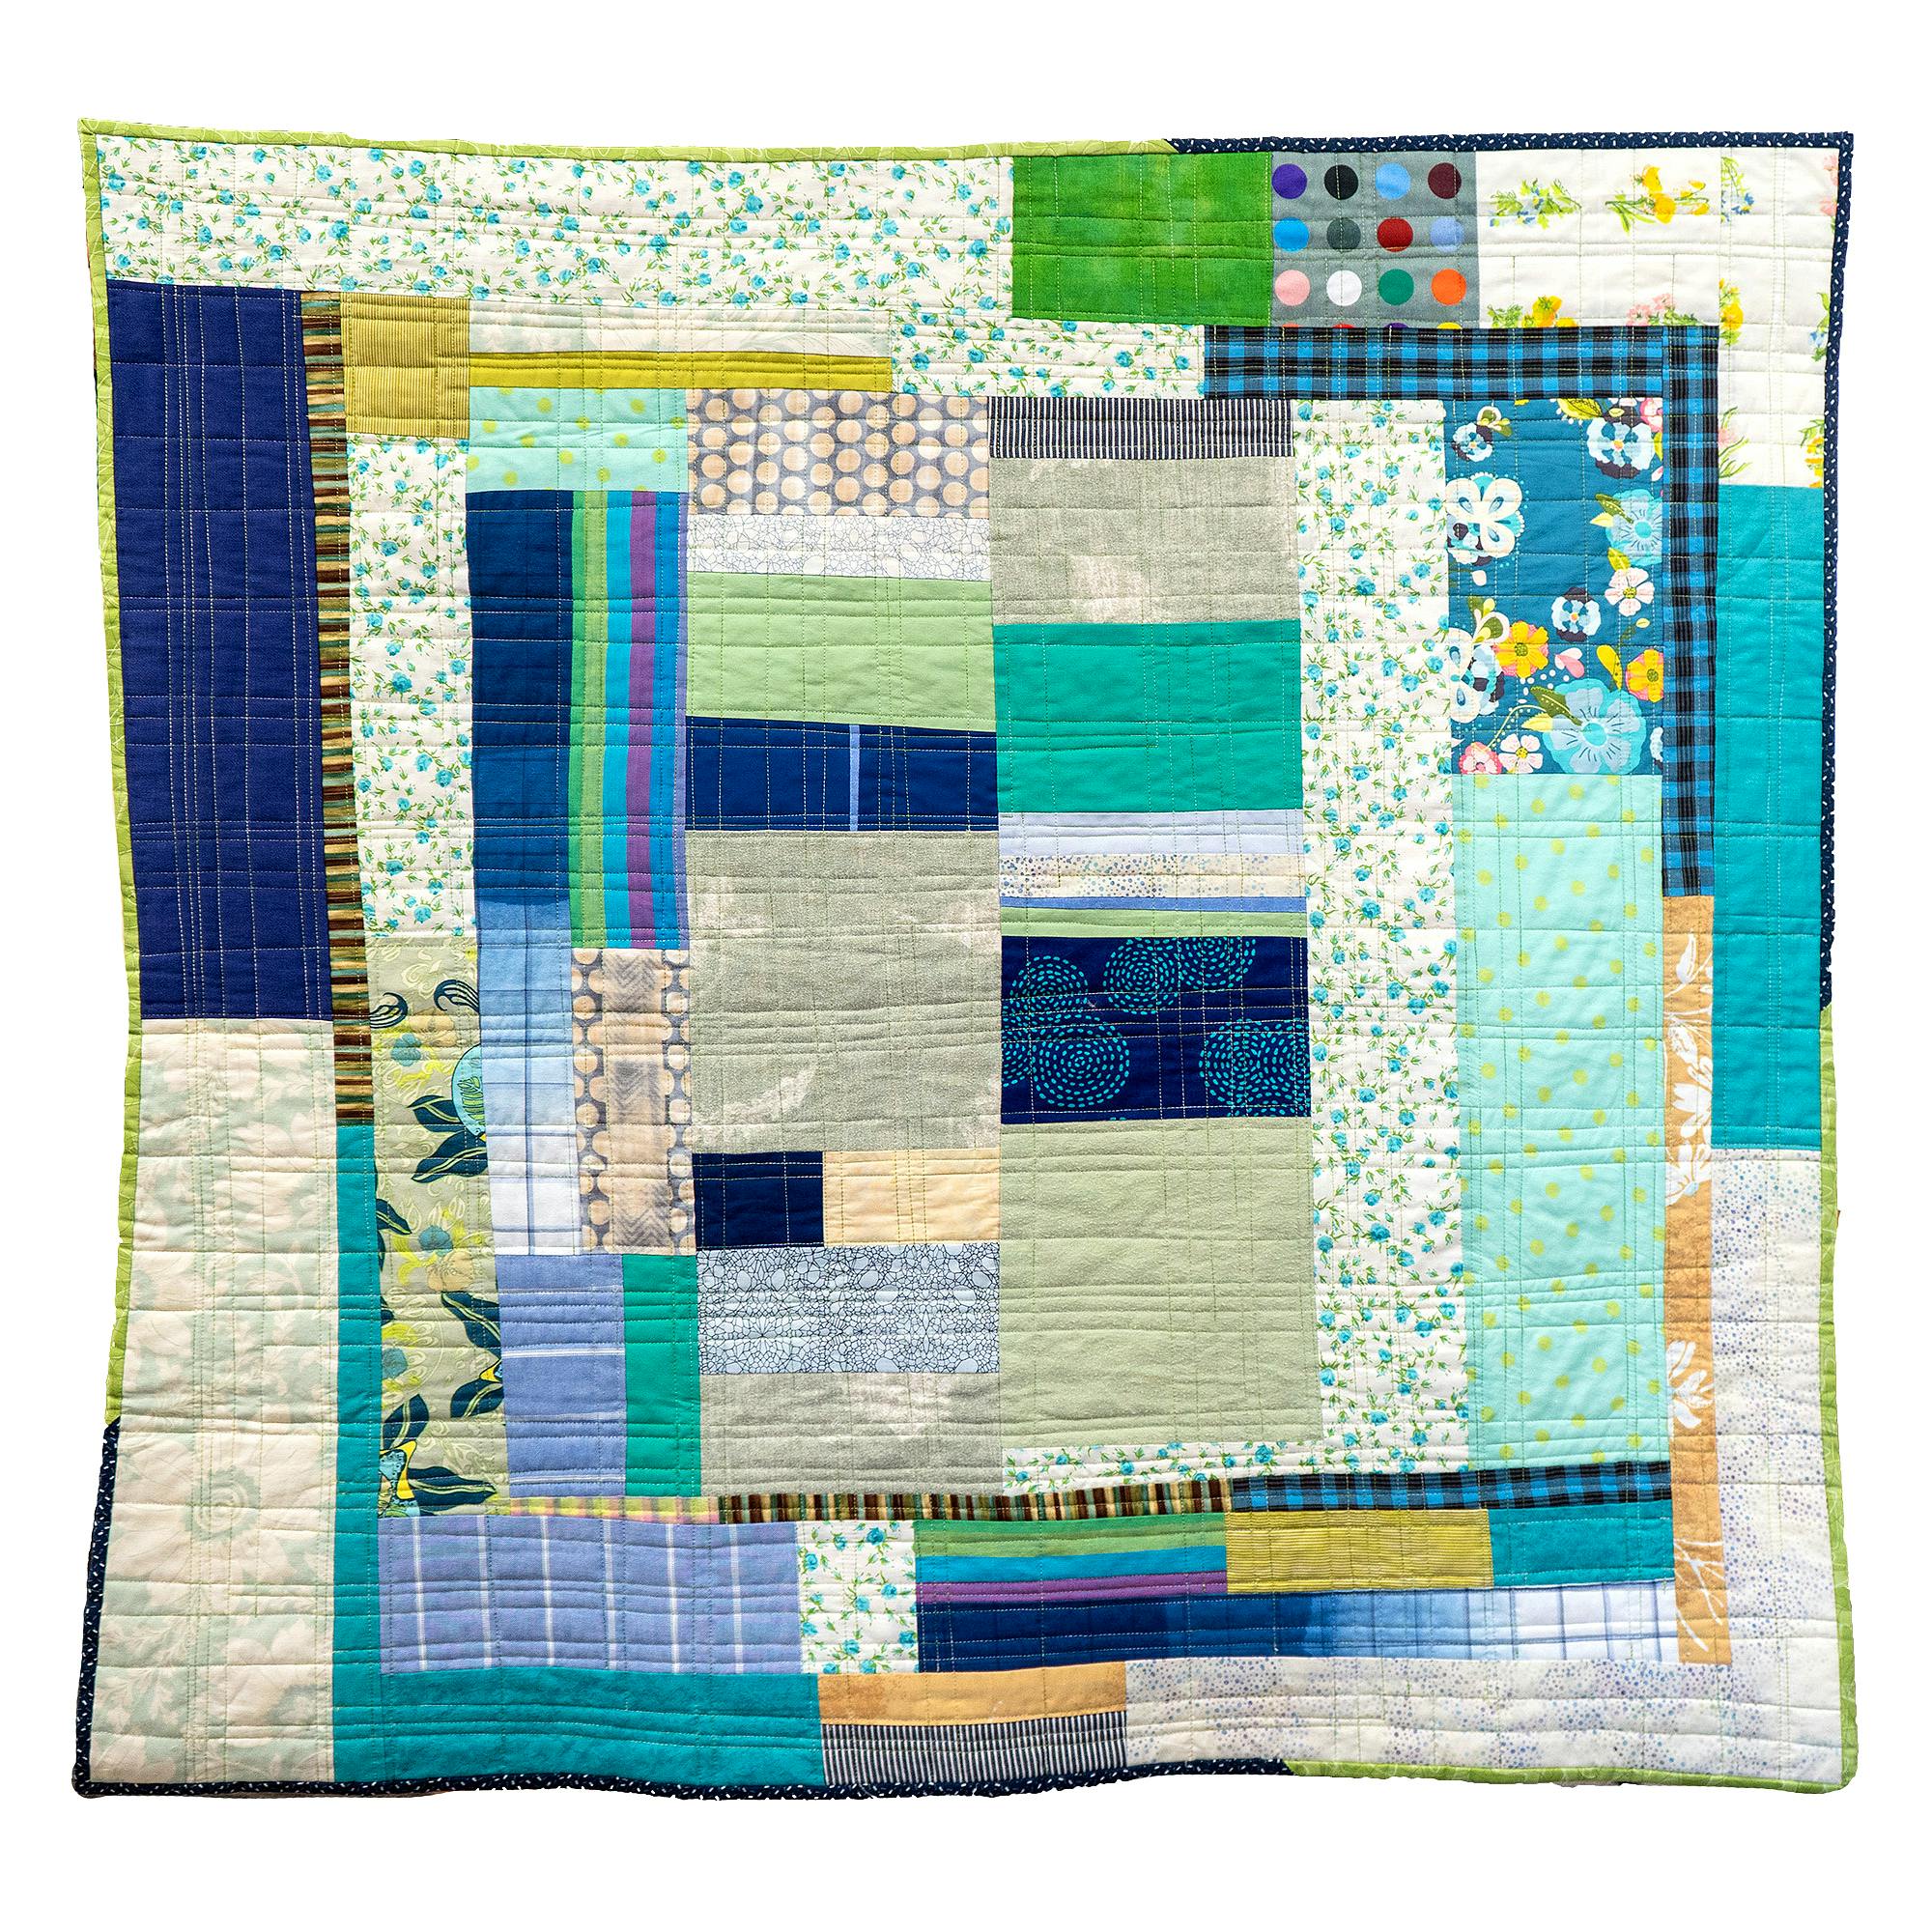 Photo of a patchwork quilt with fabrics in green, blue, white, and other colors.